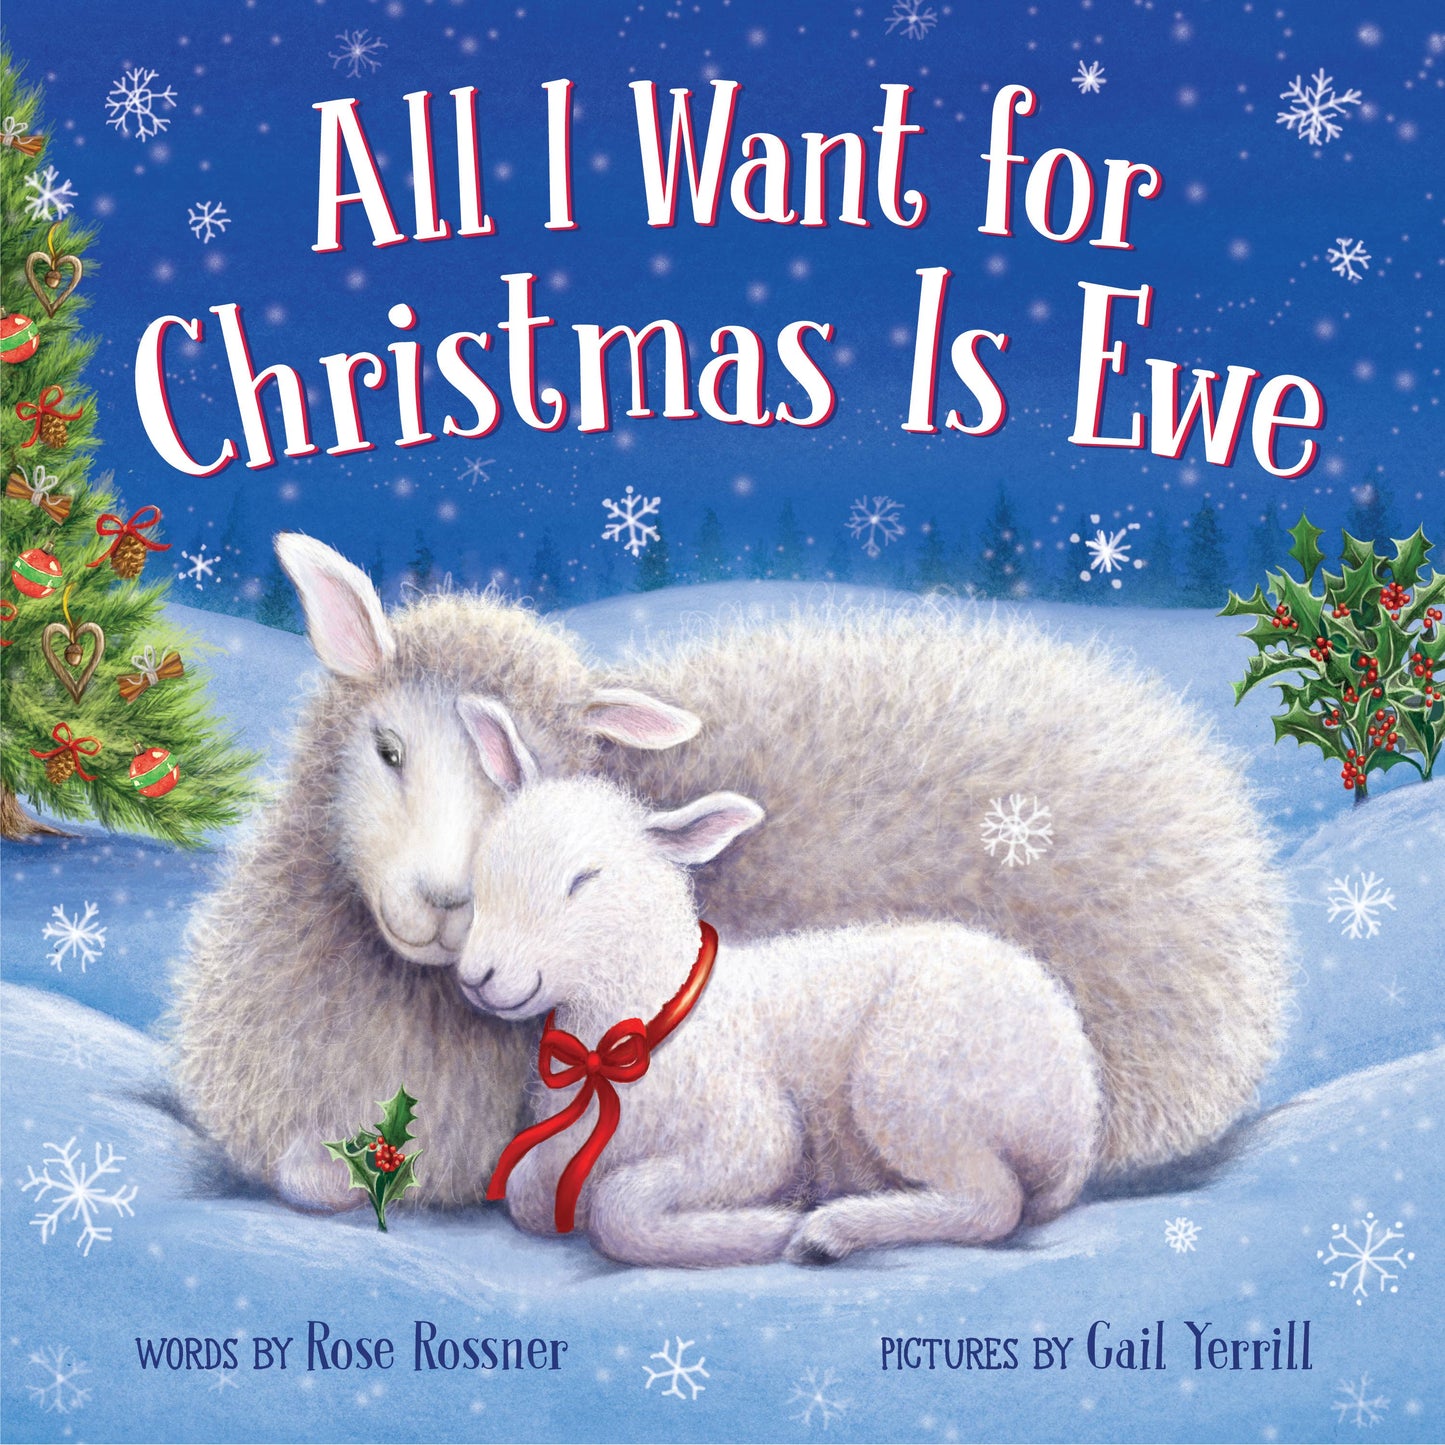 All I Want for Christmas is Ewe (board book)